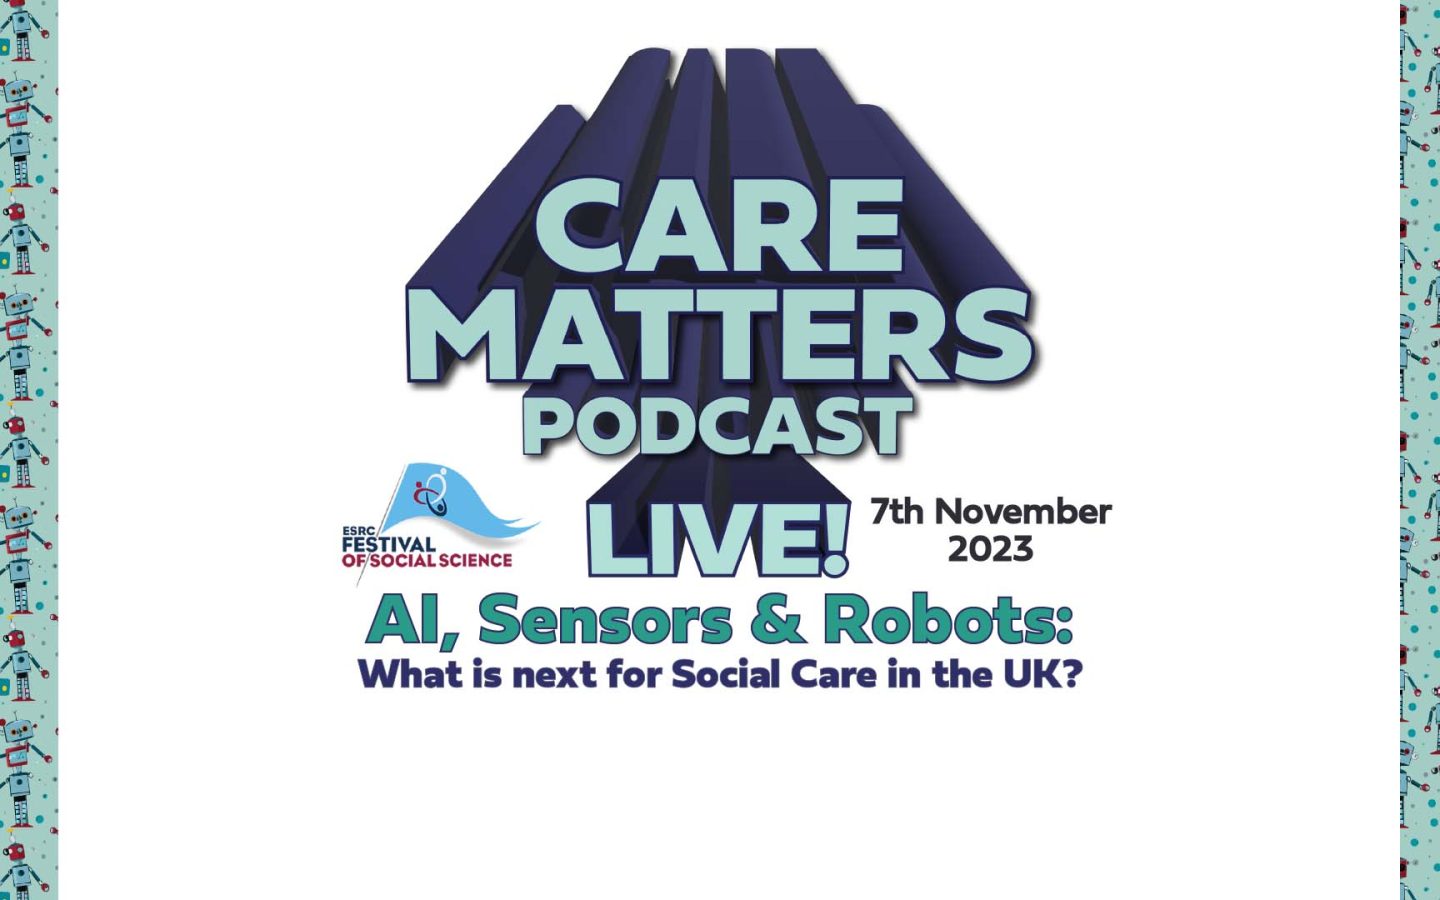 Text: CARE MATTERS PODCAST LIVE! 7th November 2023, 'AI, Sensors & Robots: What is next for Social Care in the UK?'